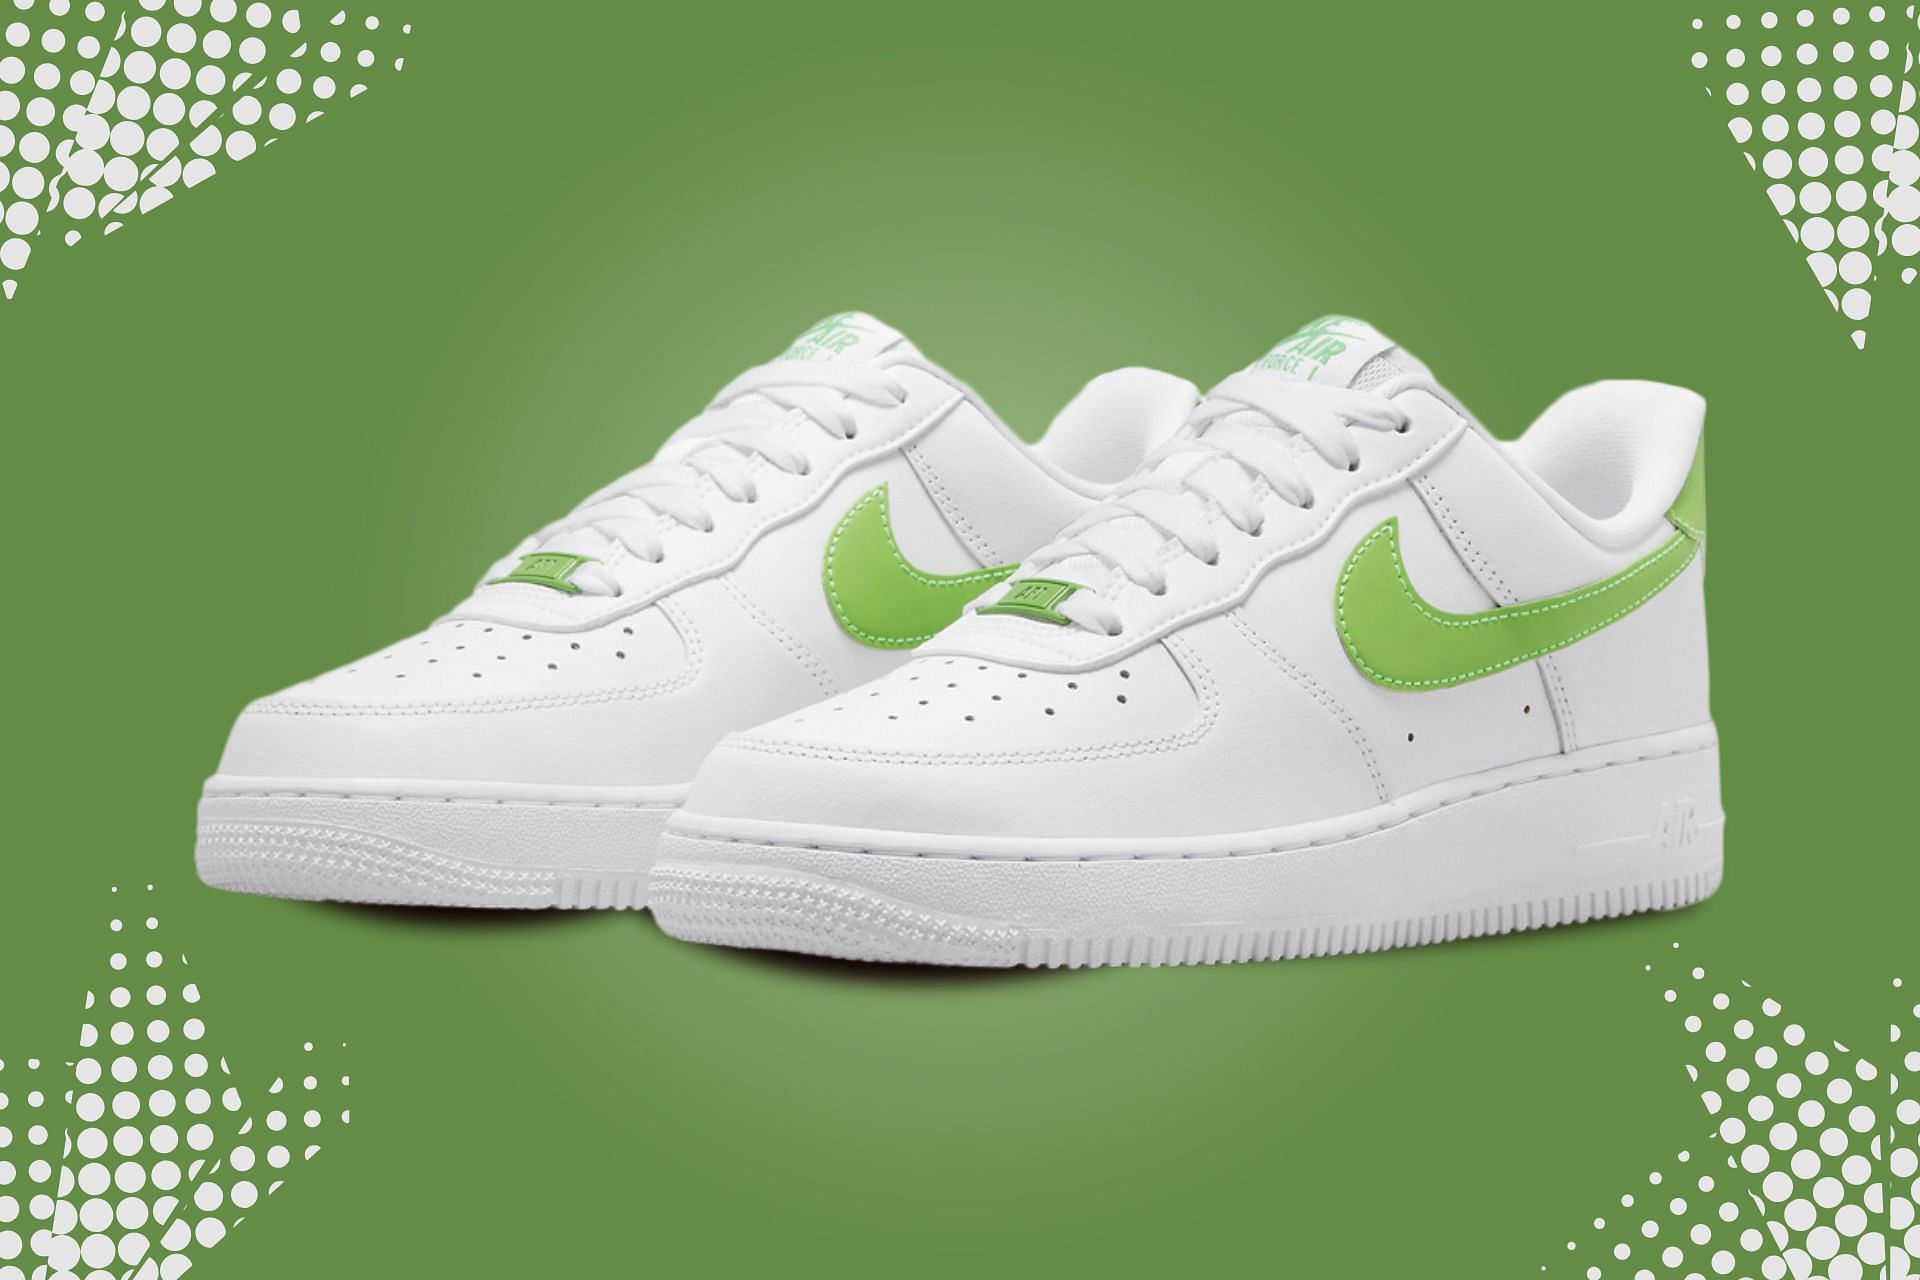 Nike Air Force 1 Low White Action Green sneakers: Where to buy